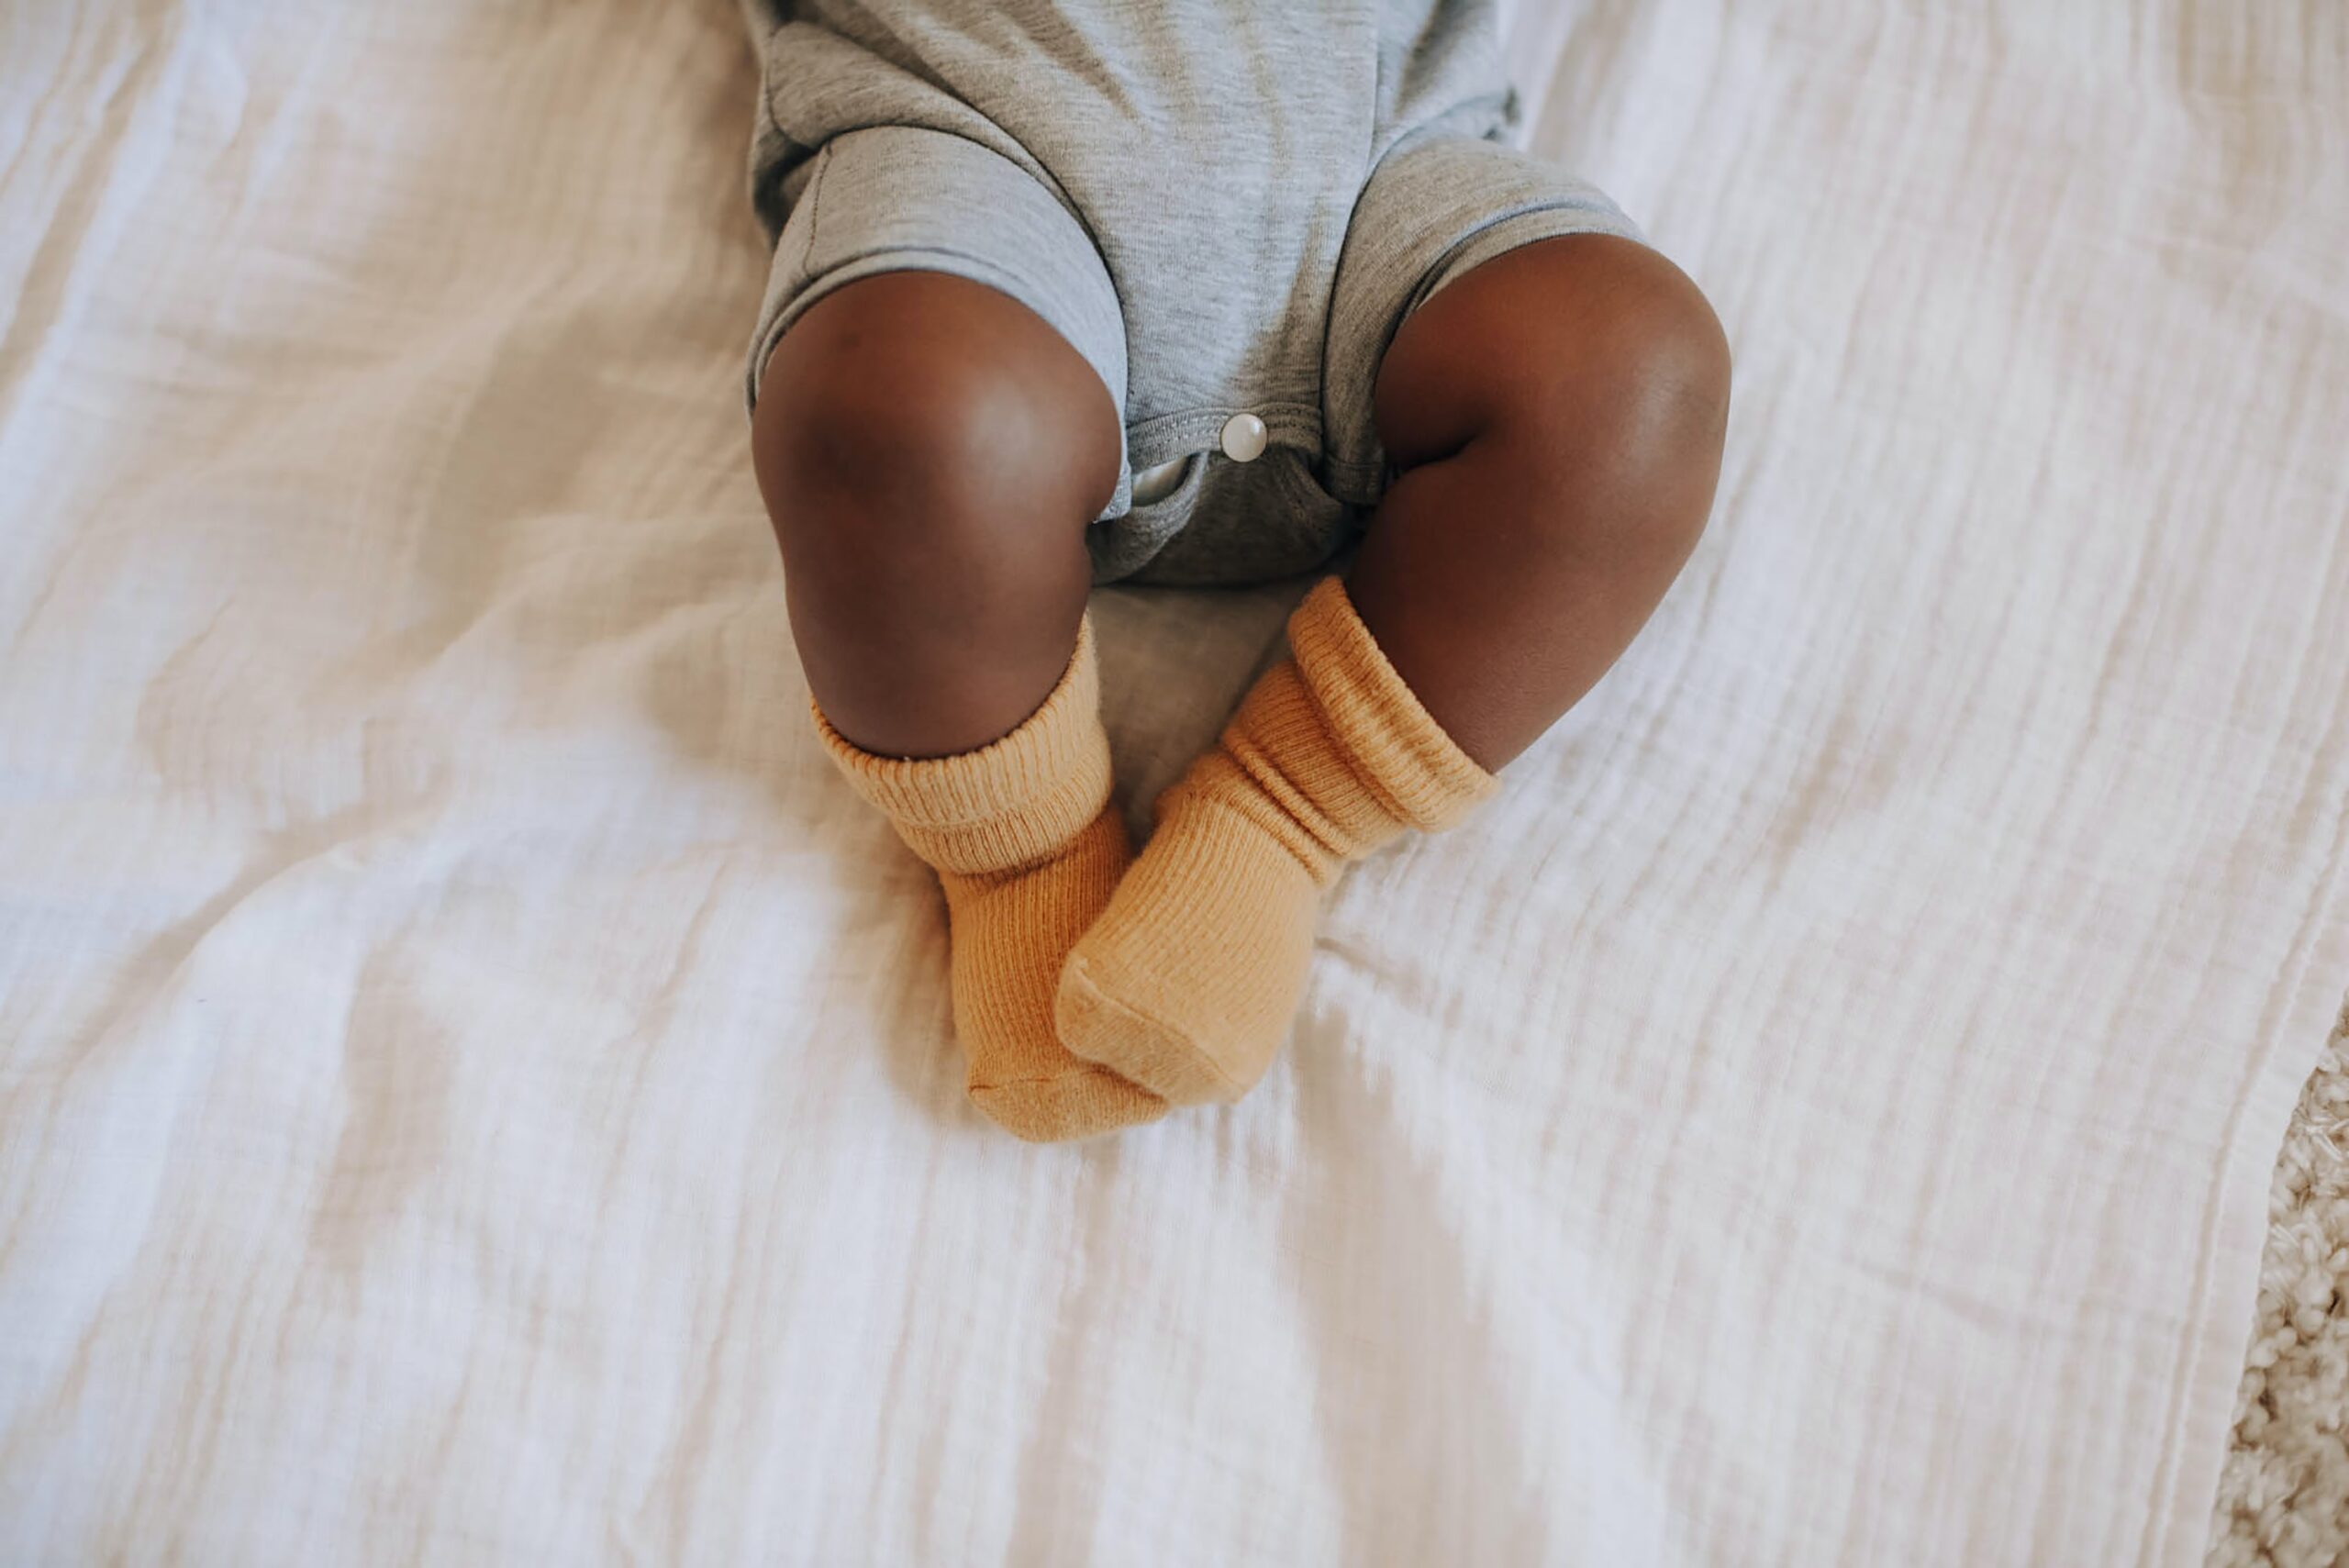 5 Products You Need to Keep Your Baby's Skin Super Soft and Smooth